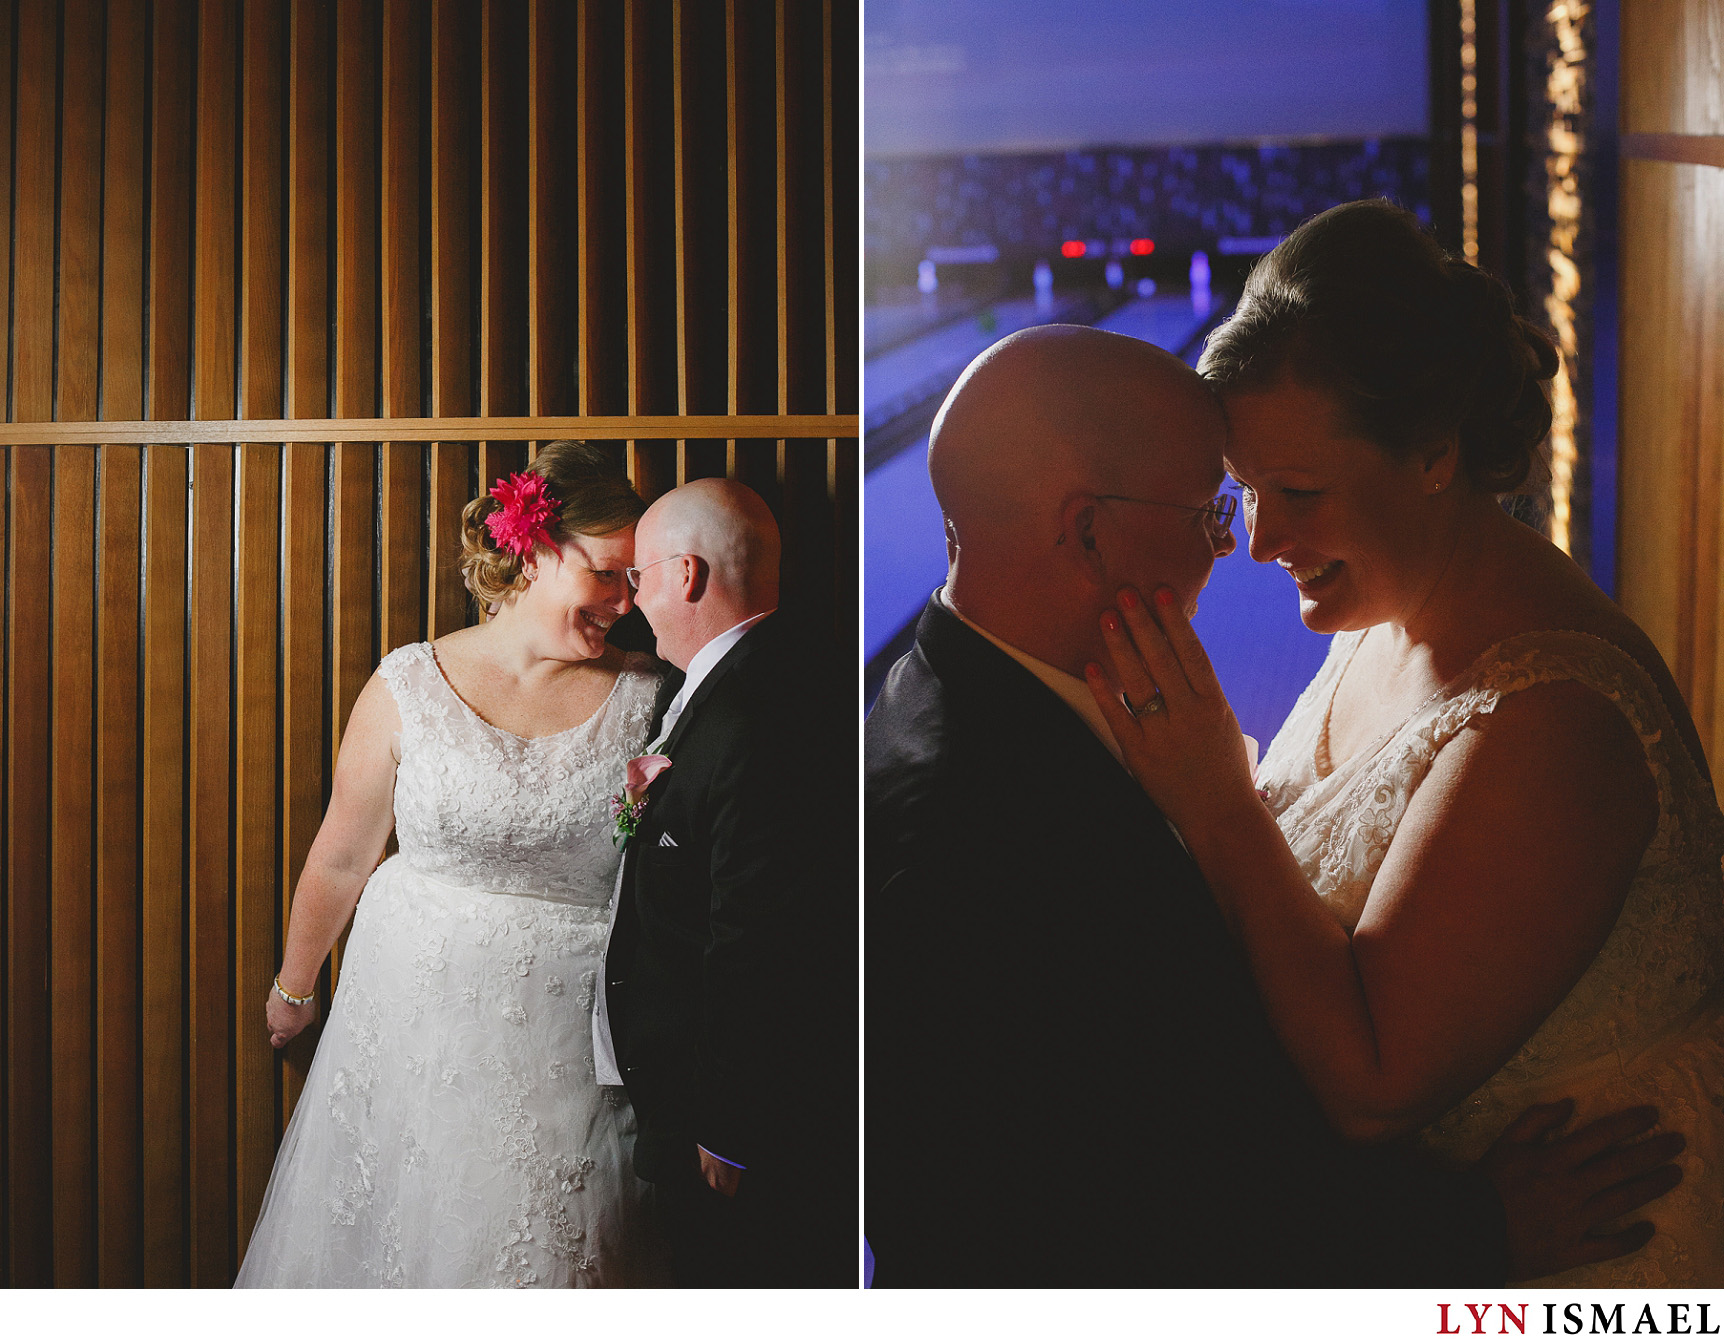 Portraits of the bride and groom.